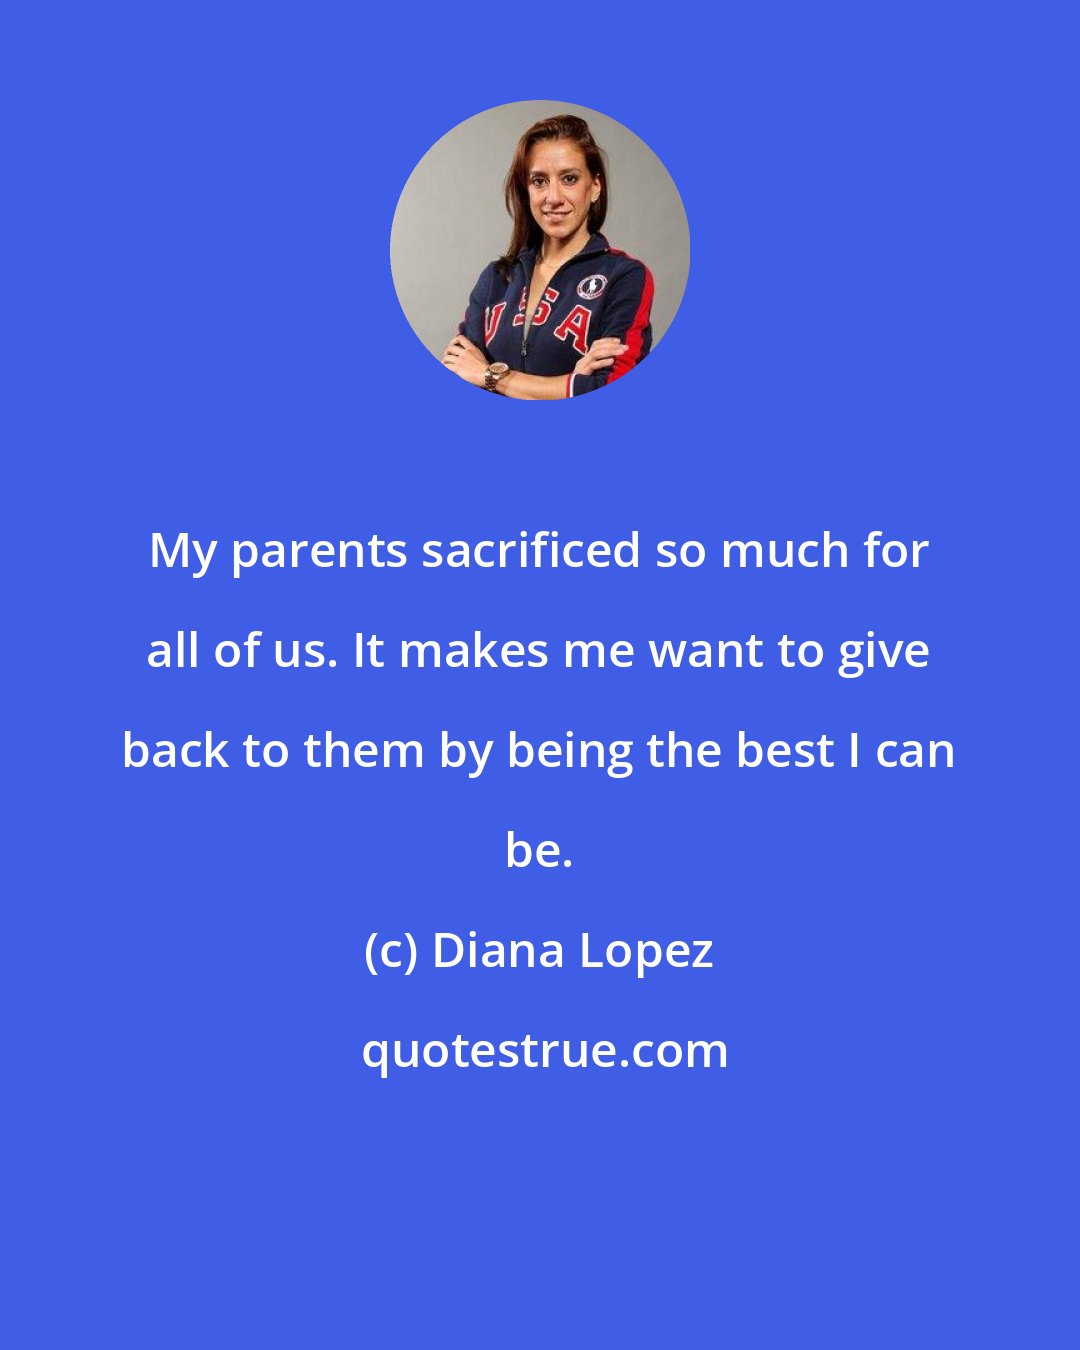 Diana Lopez: My parents sacrificed so much for all of us. It makes me want to give back to them by being the best I can be.